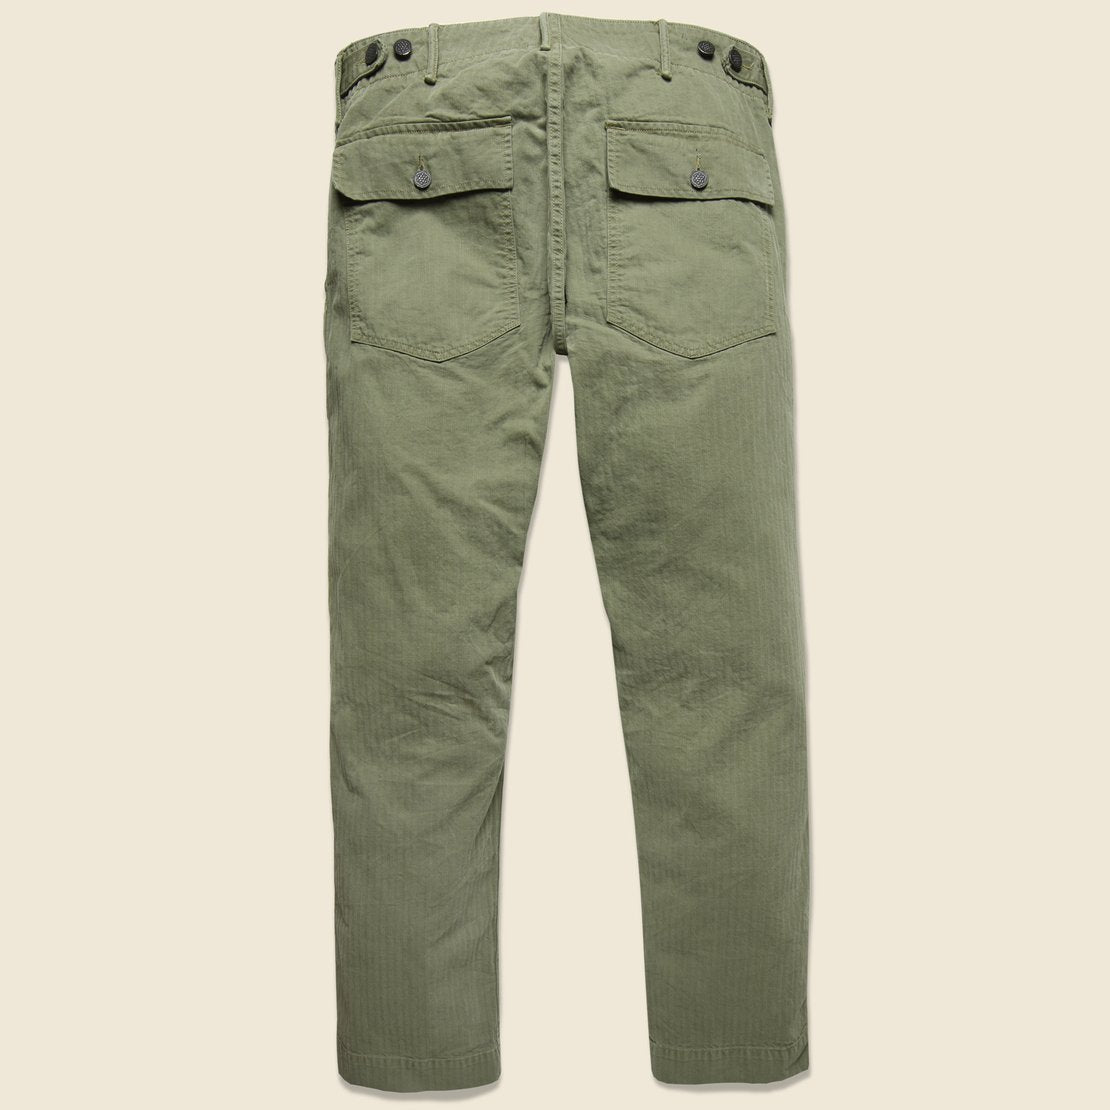 Cotton Herringbone Pant - Brewster Green - RRL - STAG Provisions - Pants - Twill